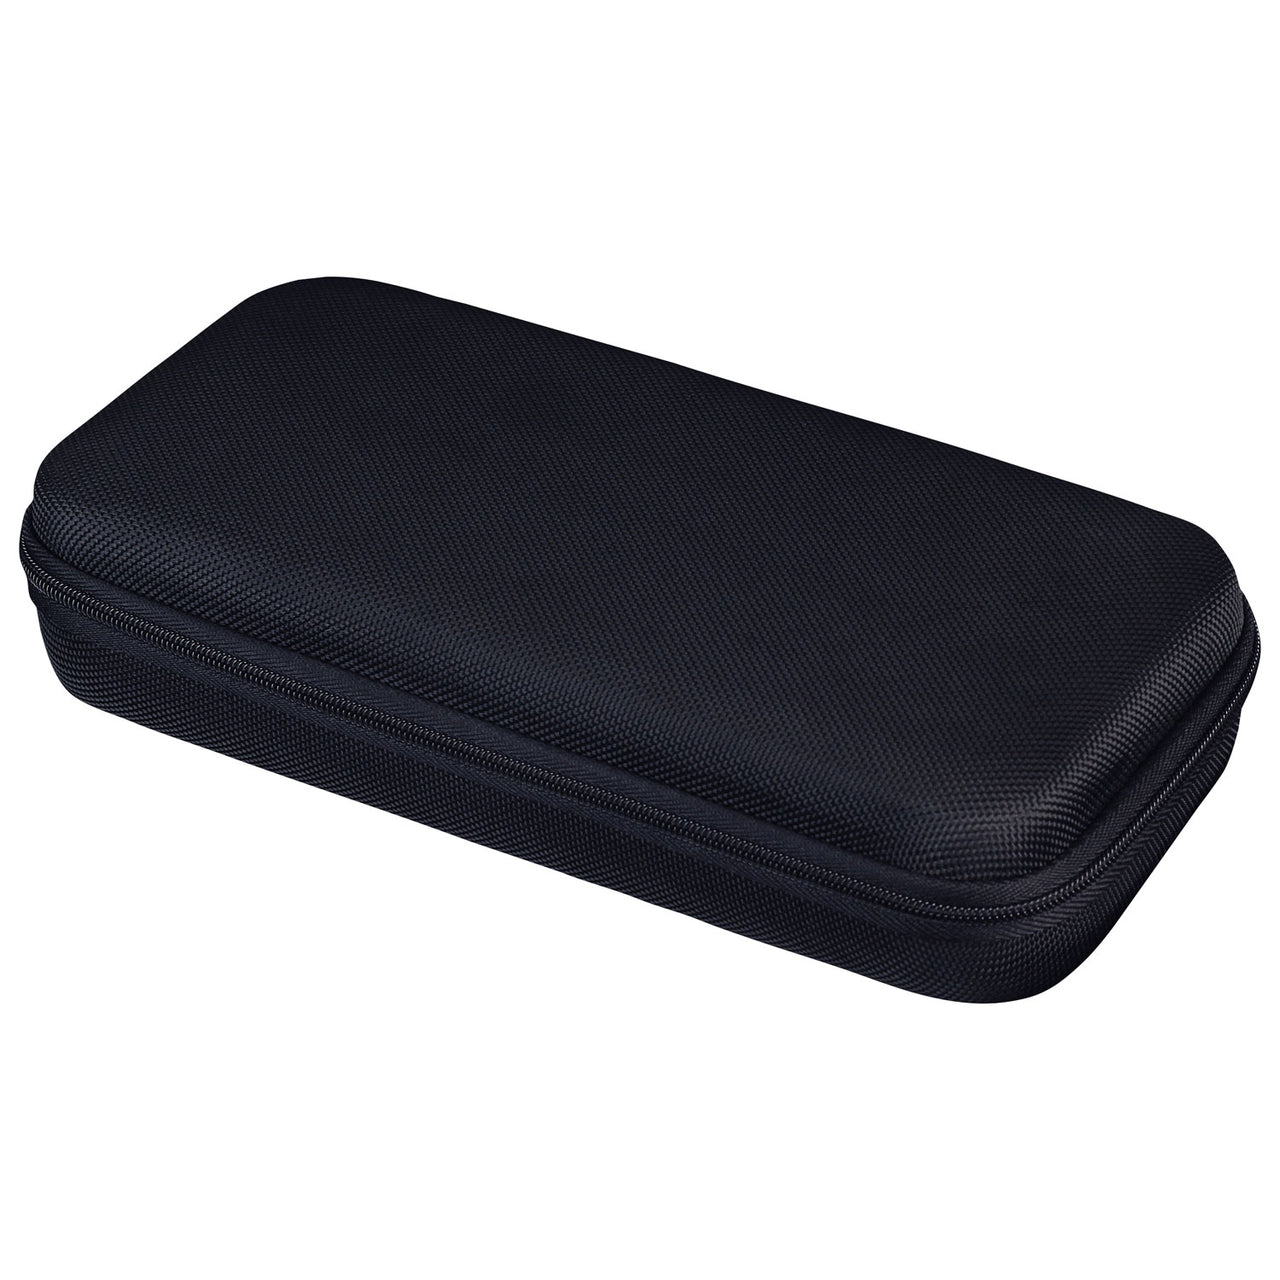 Insignia Go Storage & Travel Case for Nintendo Switch - Black - Only at Best Buy